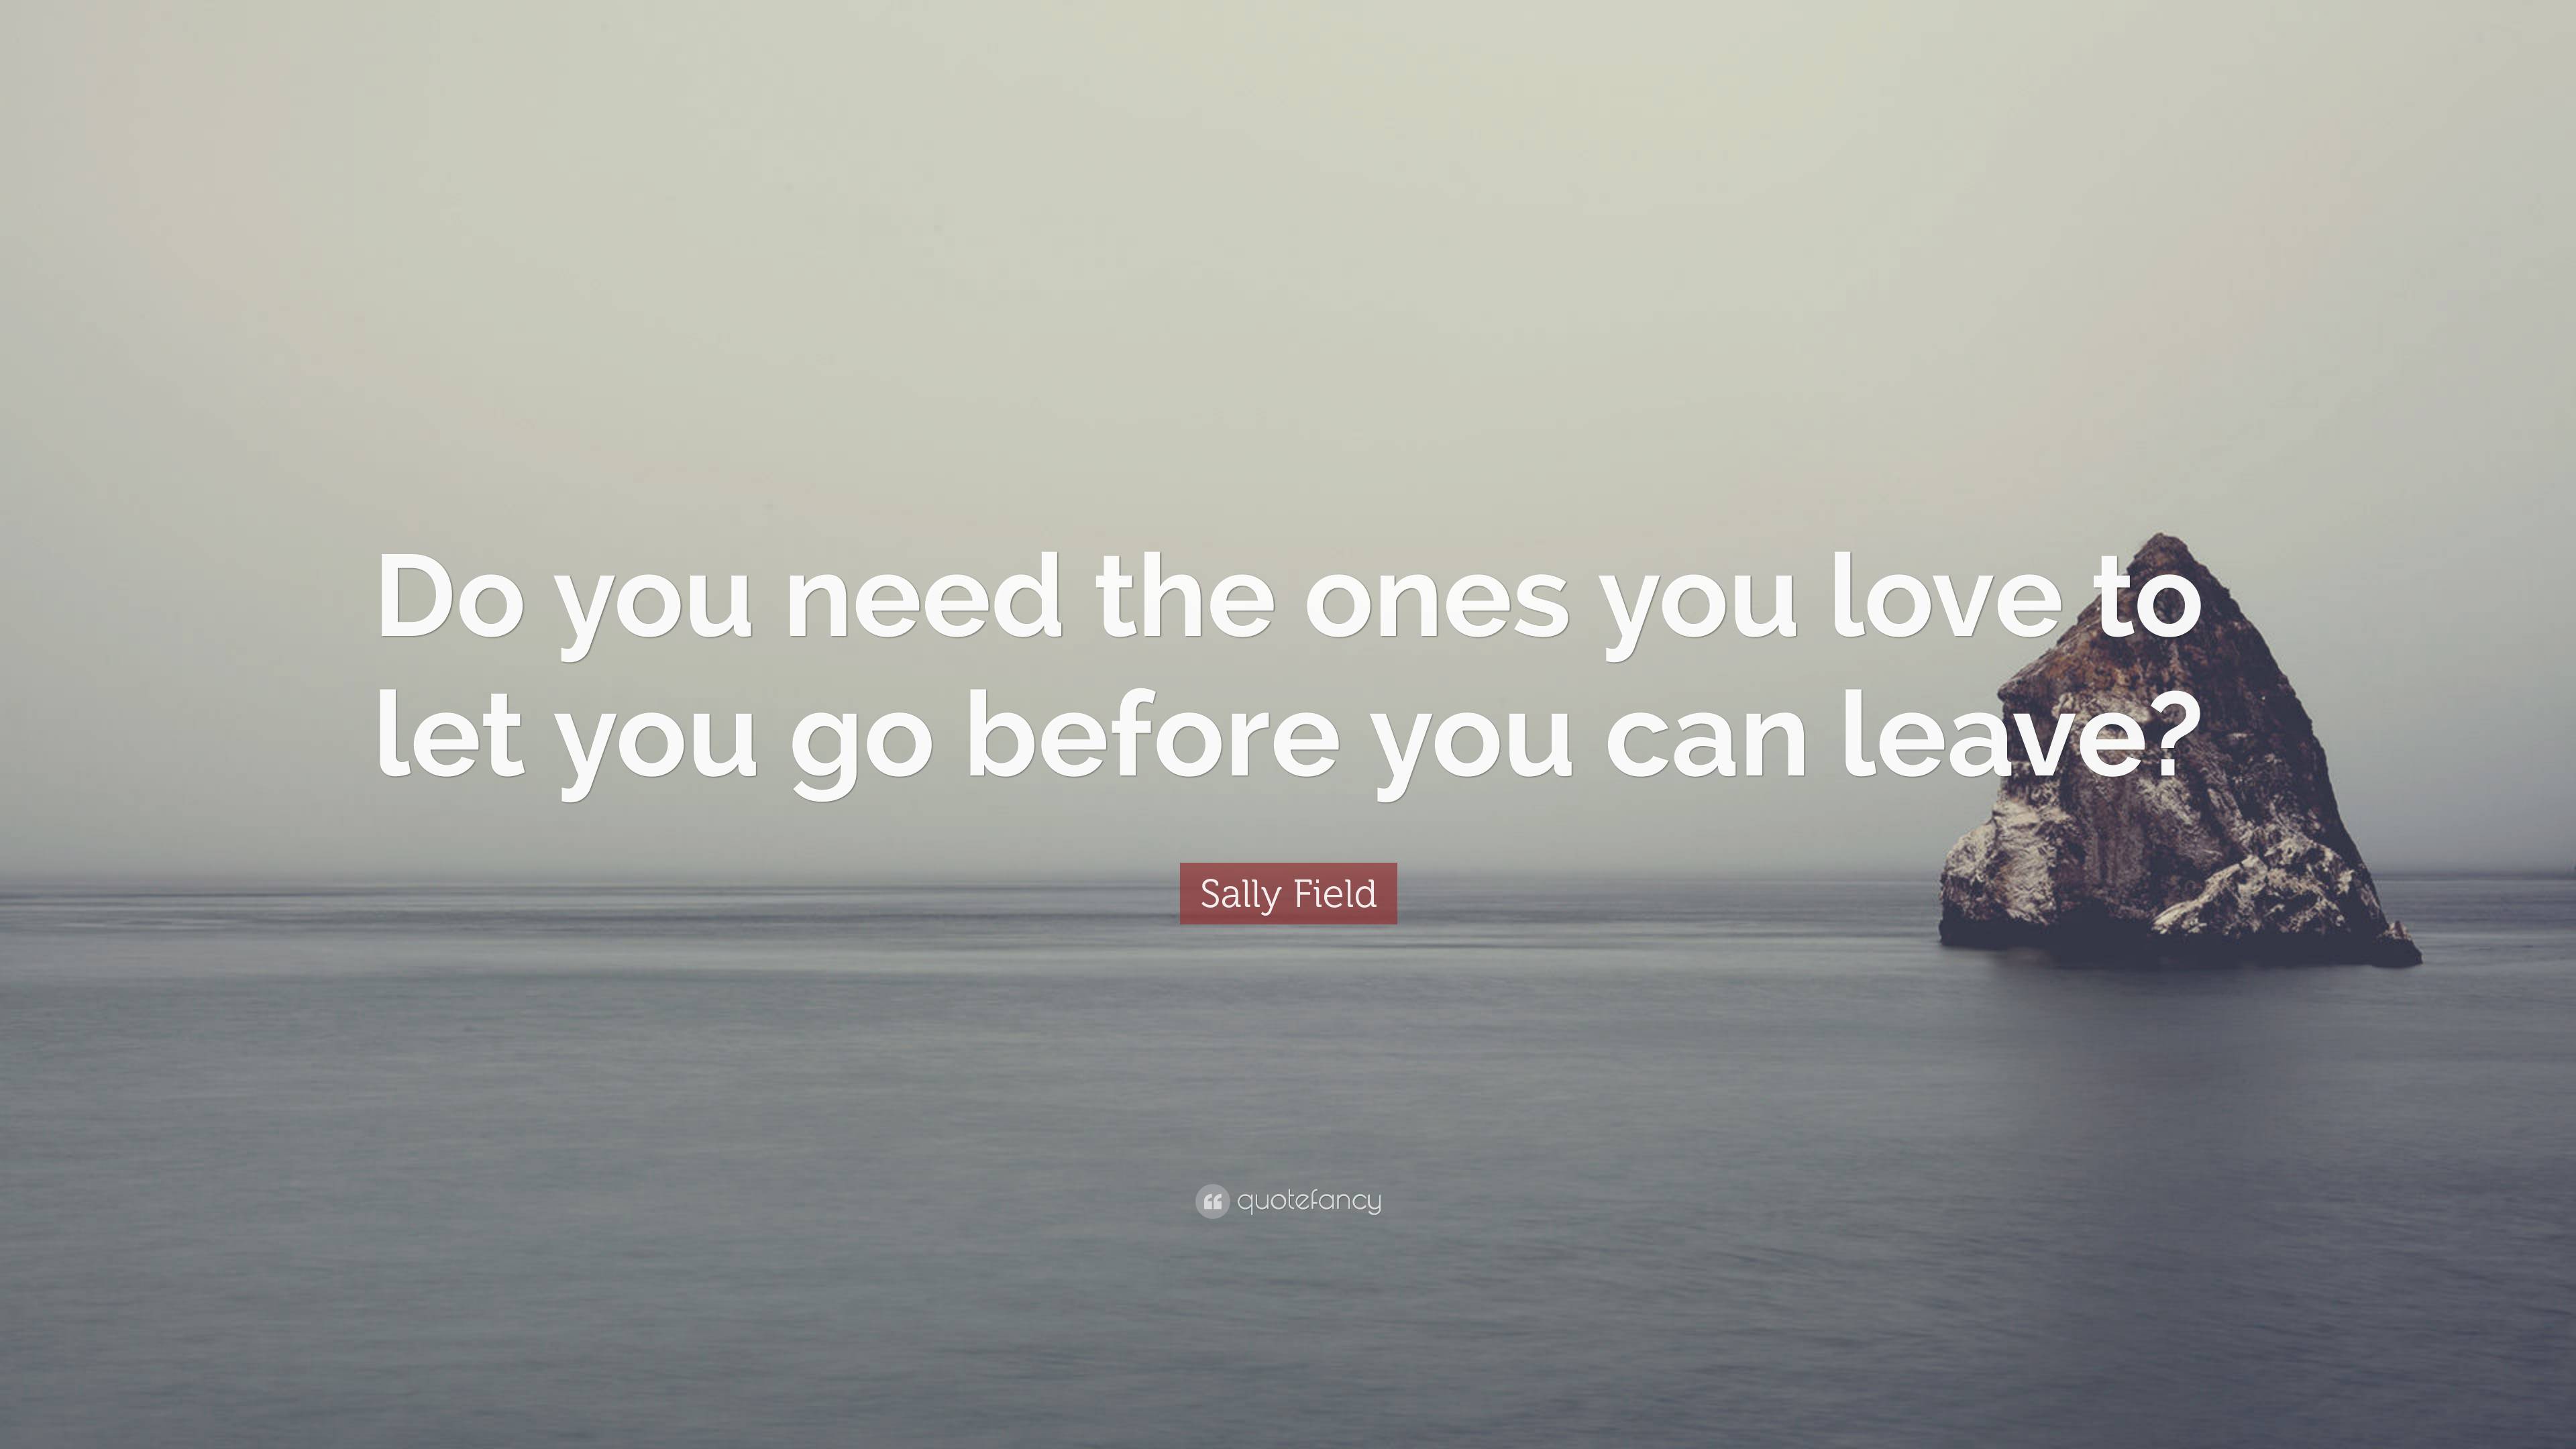 Sally Field Quote: “Do you need the ones you love to let you go before ...